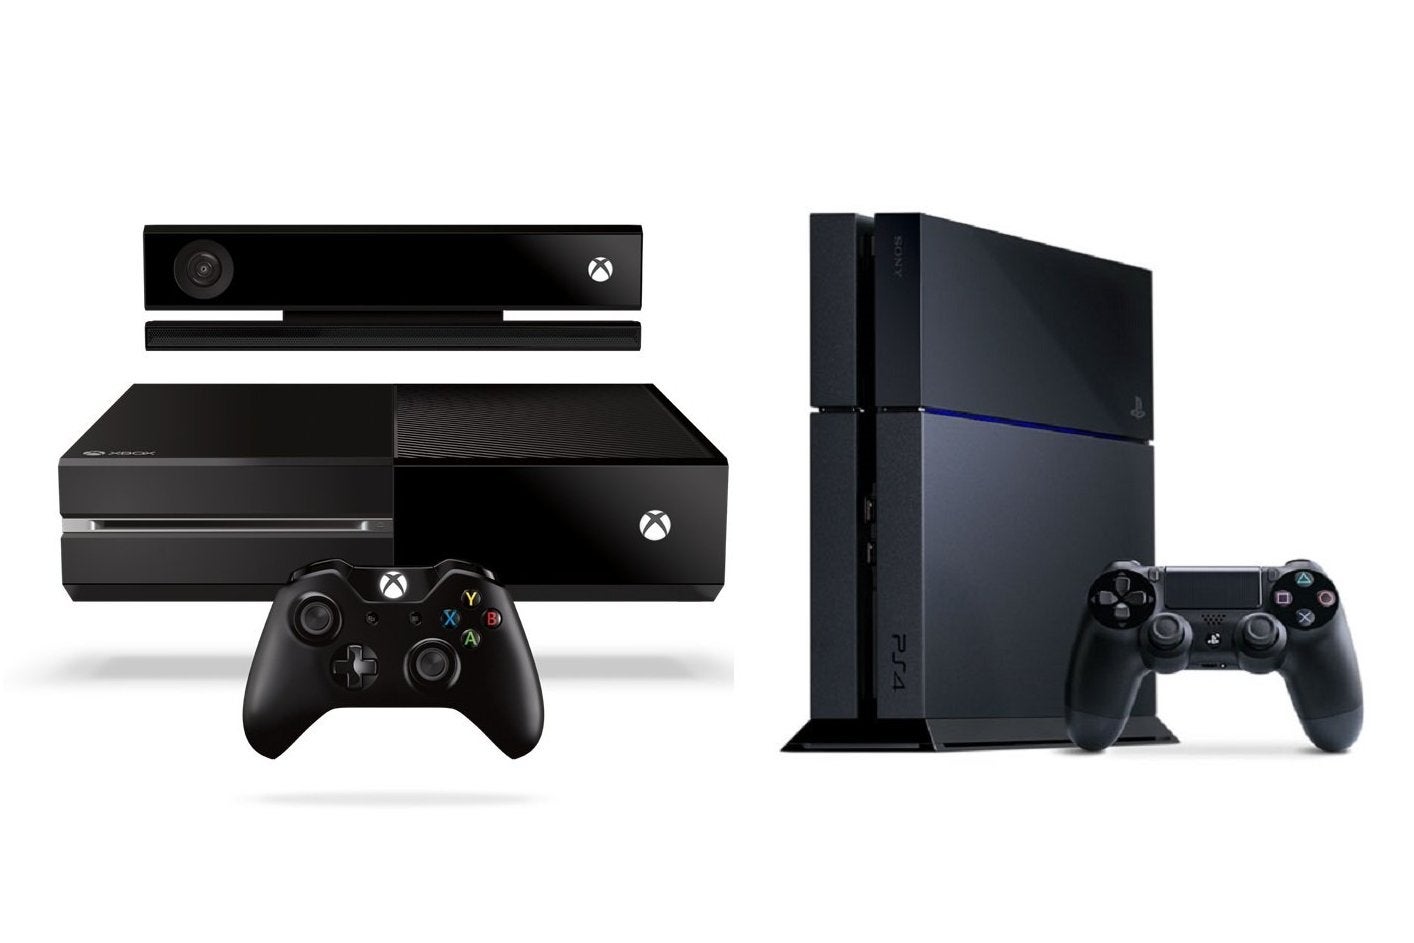 Image for Roundtable: Xbox One vs. PS4 at Gamescom